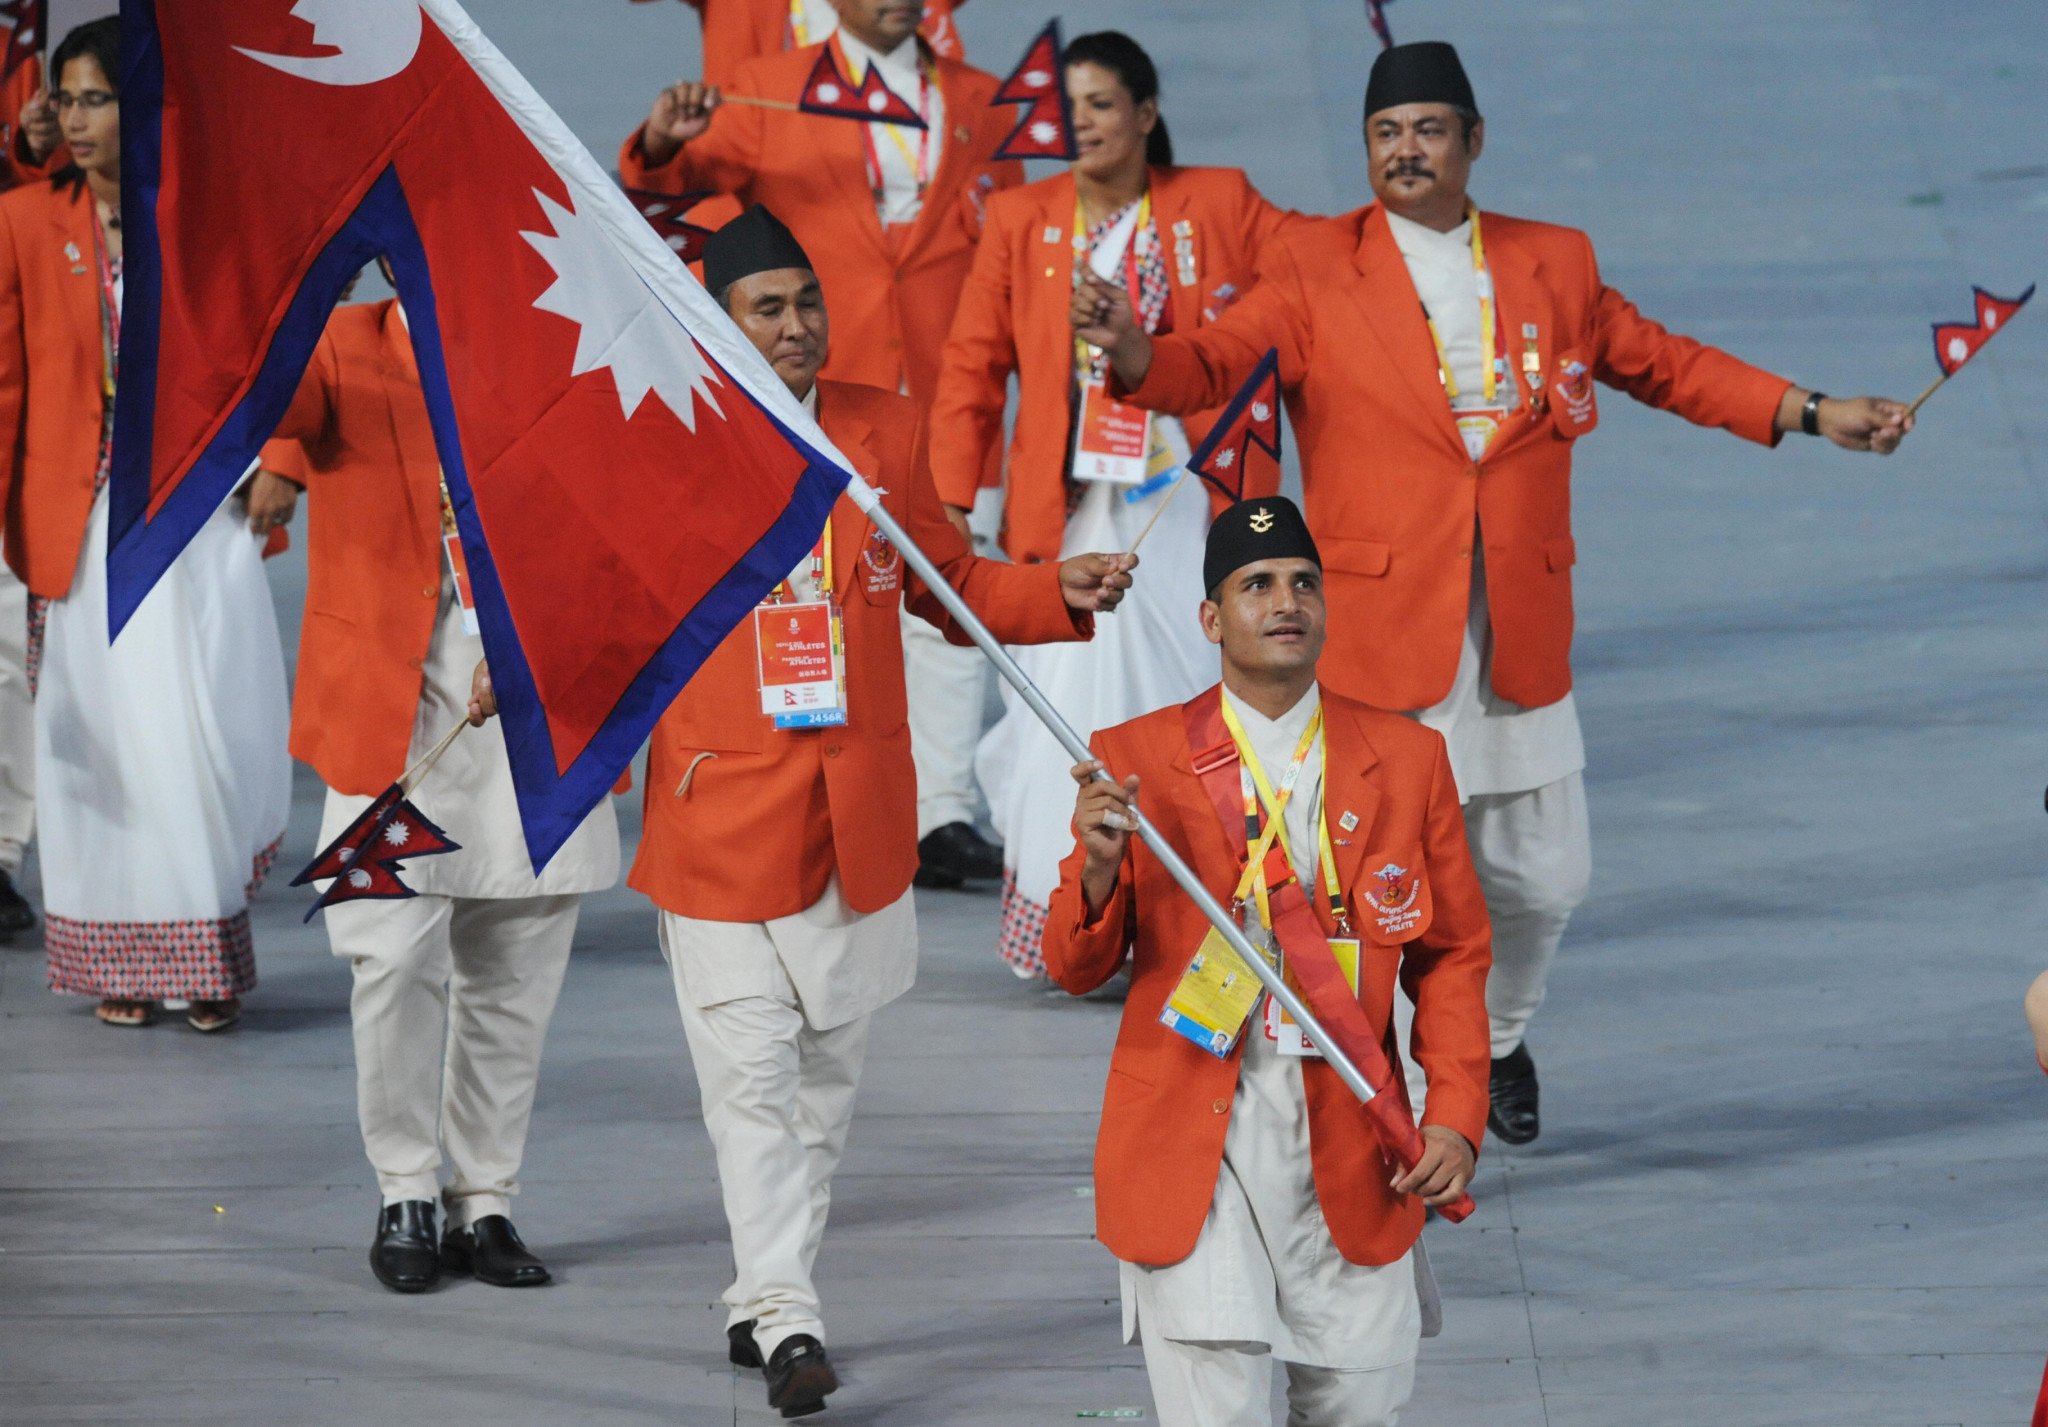 Bista carried the Nepal flag at the Beijing 2008 Opening Ceremony ©Getty Images